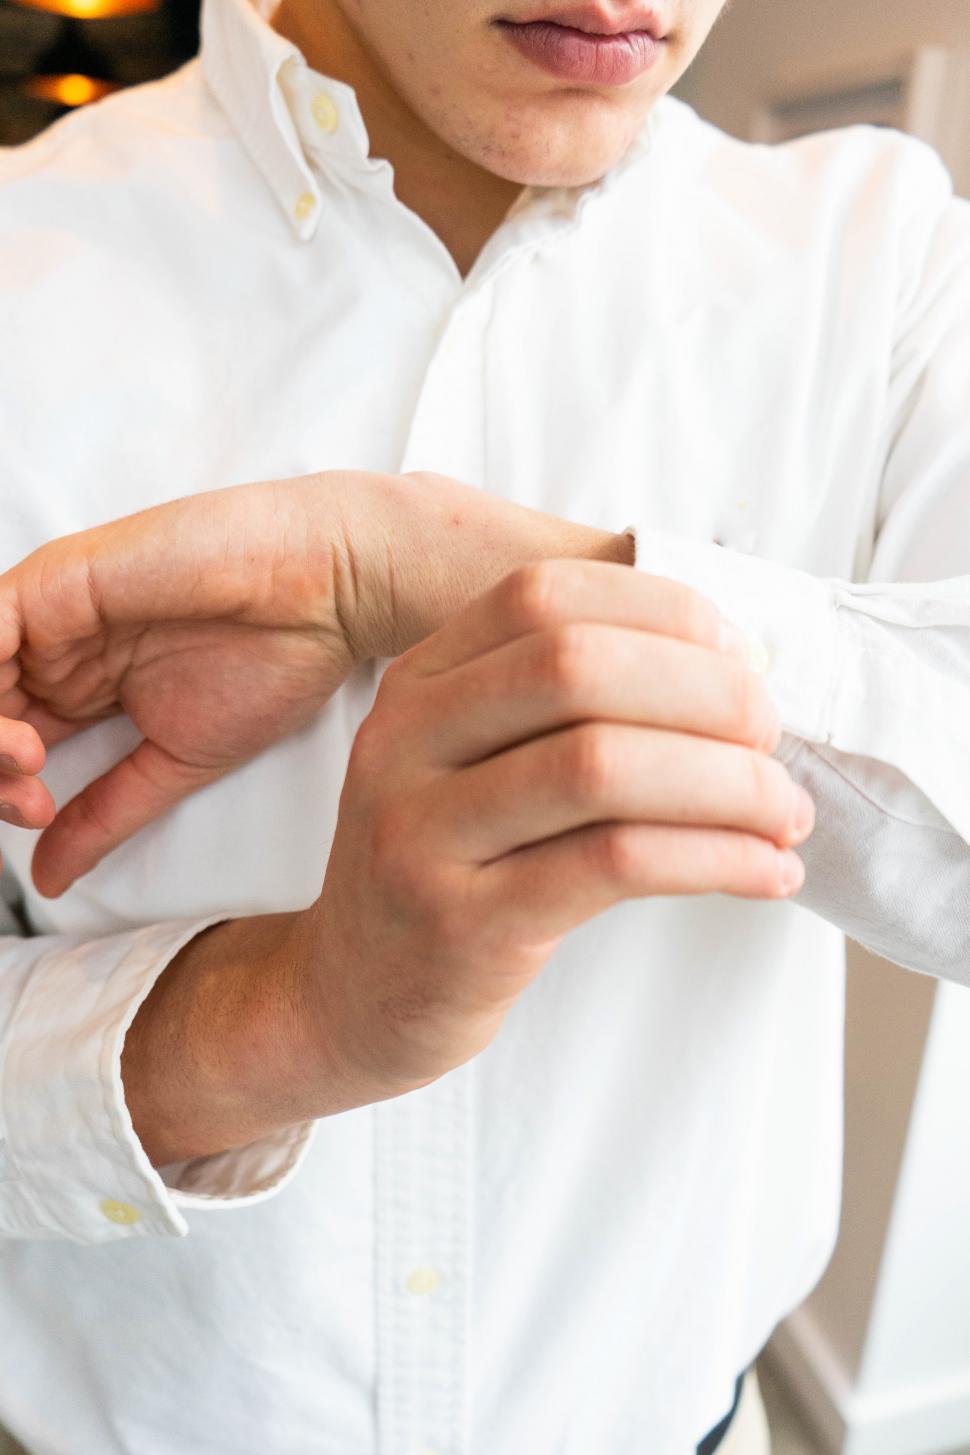 Free Image of Young man hands fastening buttons on shirt sleeve 